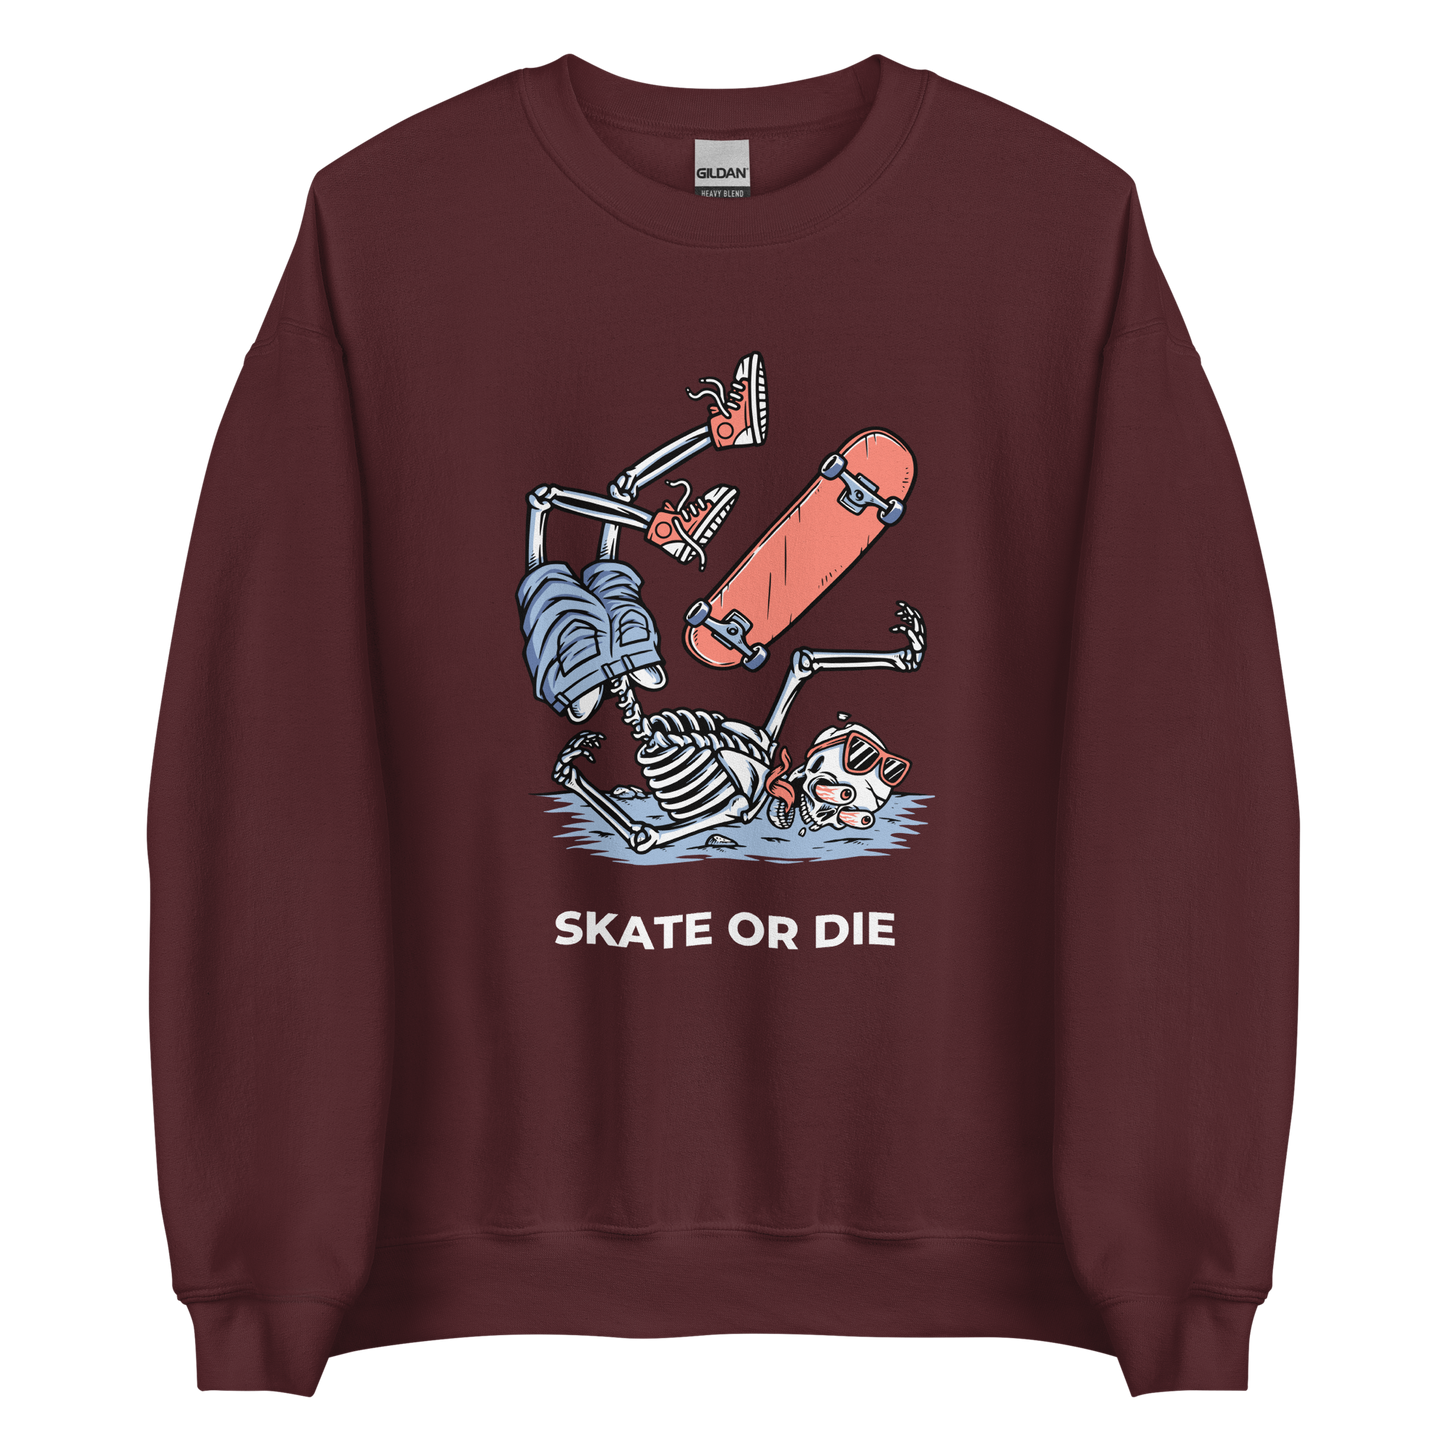 Maroon Skate or Die Sweatshirt featuring a daring Skeleton Falling While Skateboarding graphic on the chest - Cool Graphic Skeleton Sweatshirts - Boozy Fox